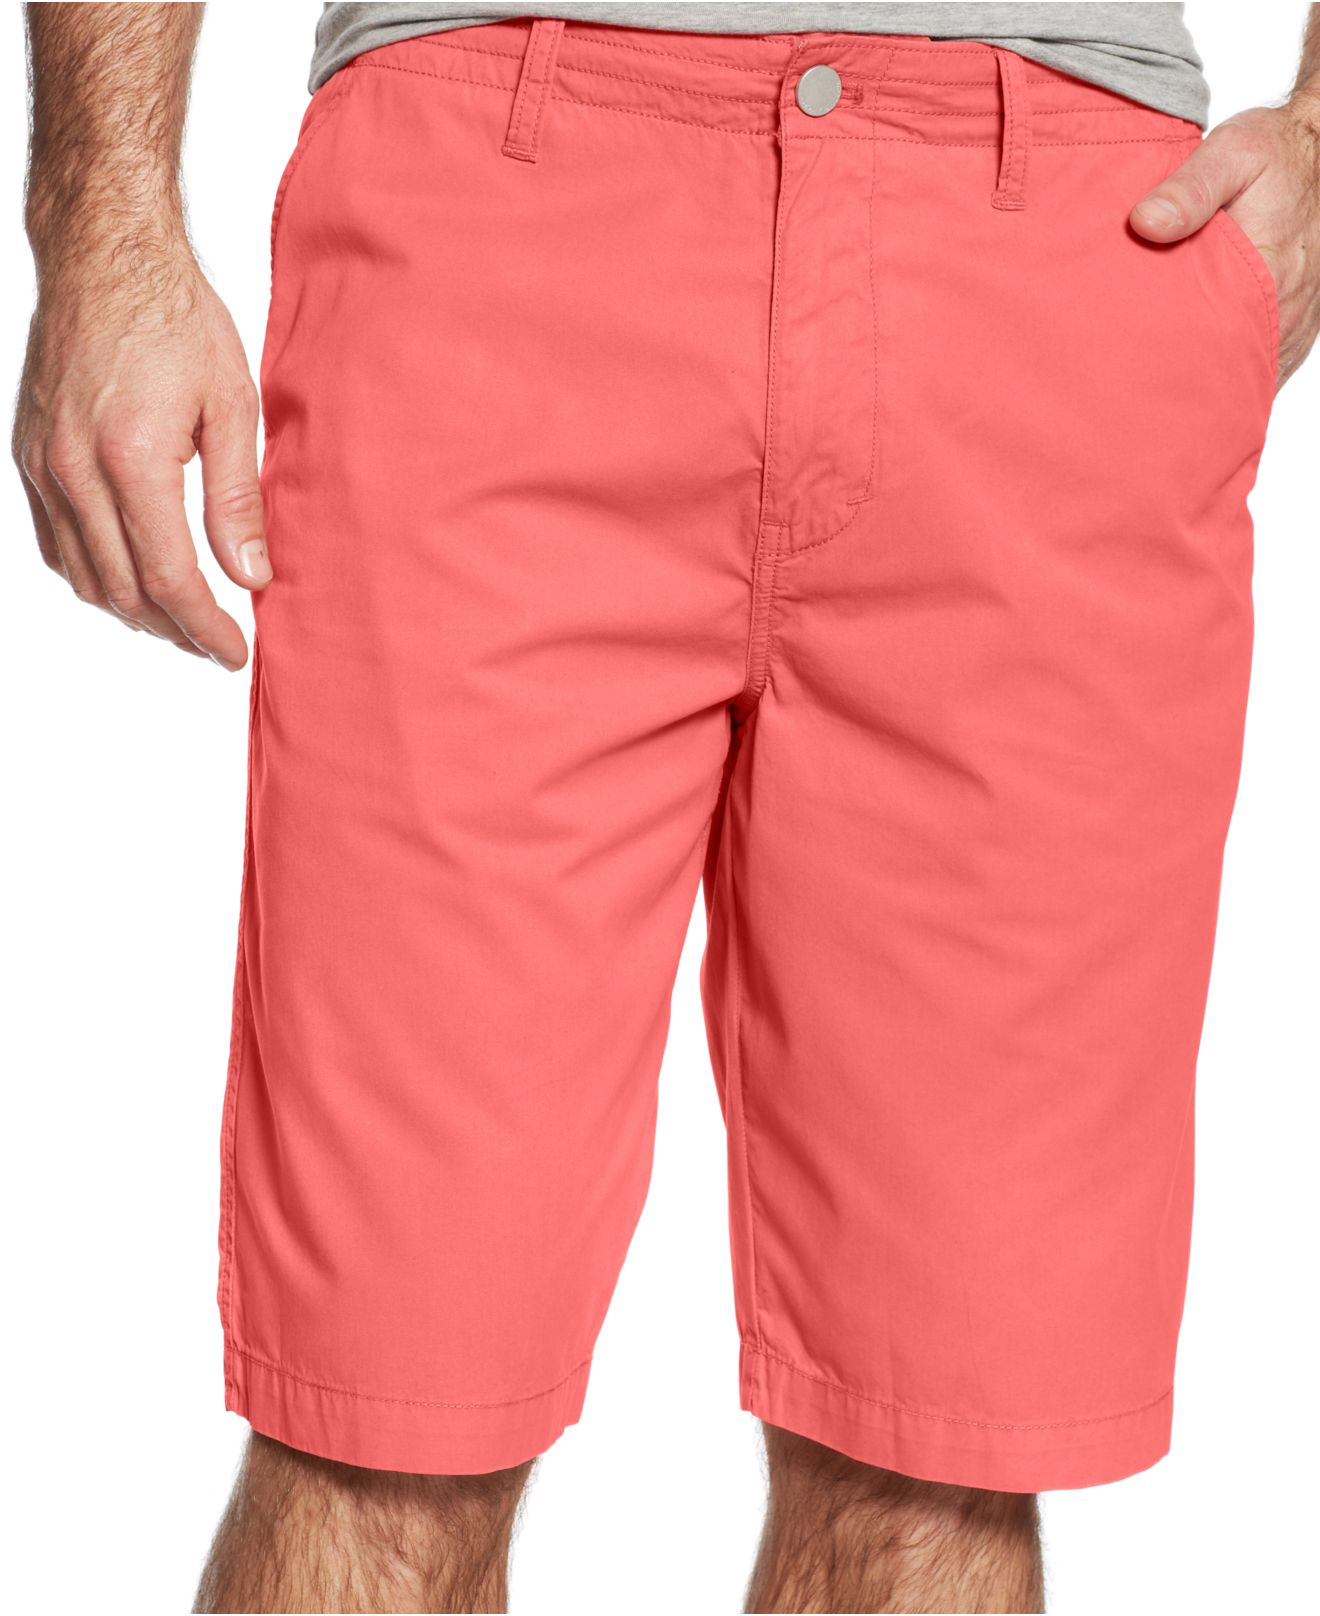 Calvin Klein Chino Shorts Shop, 59% OFF | oldetownecutlery.com